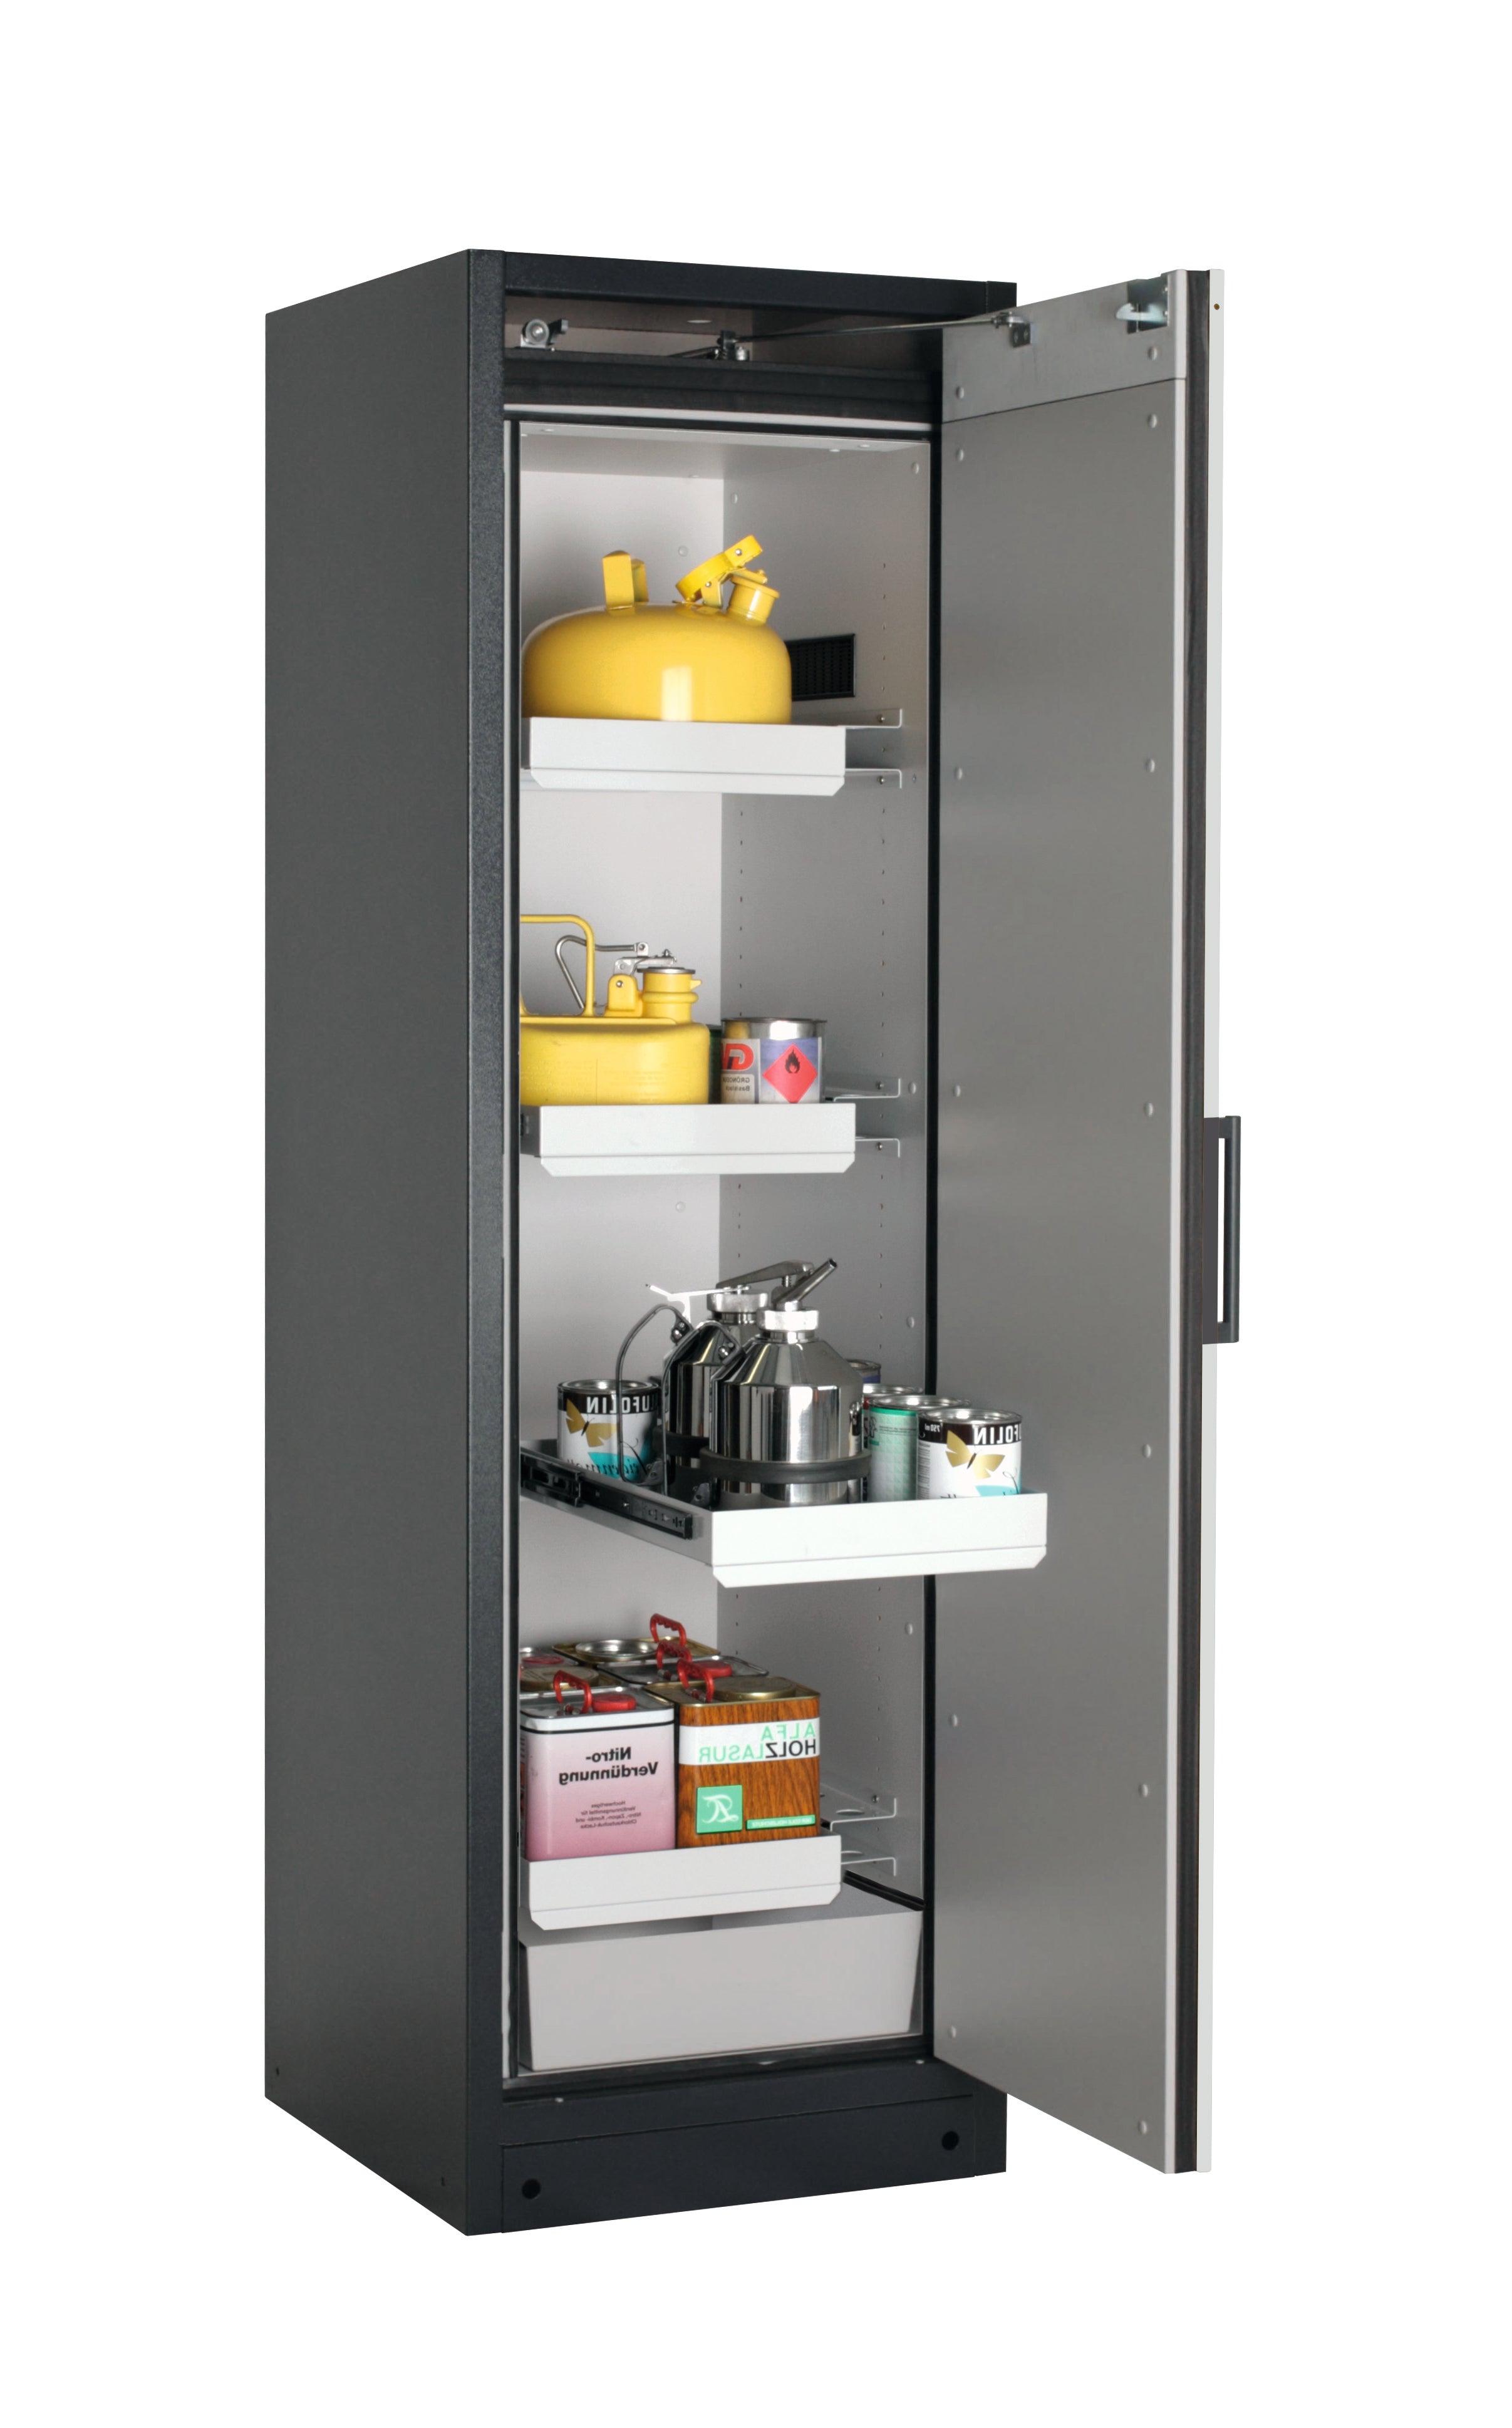 Type 90 safety storage cabinet Q-PEGASUS-90 model Q90.195.060.WDACR in light grey RAL 7035 with 3x drawer (standard) (sheet steel),